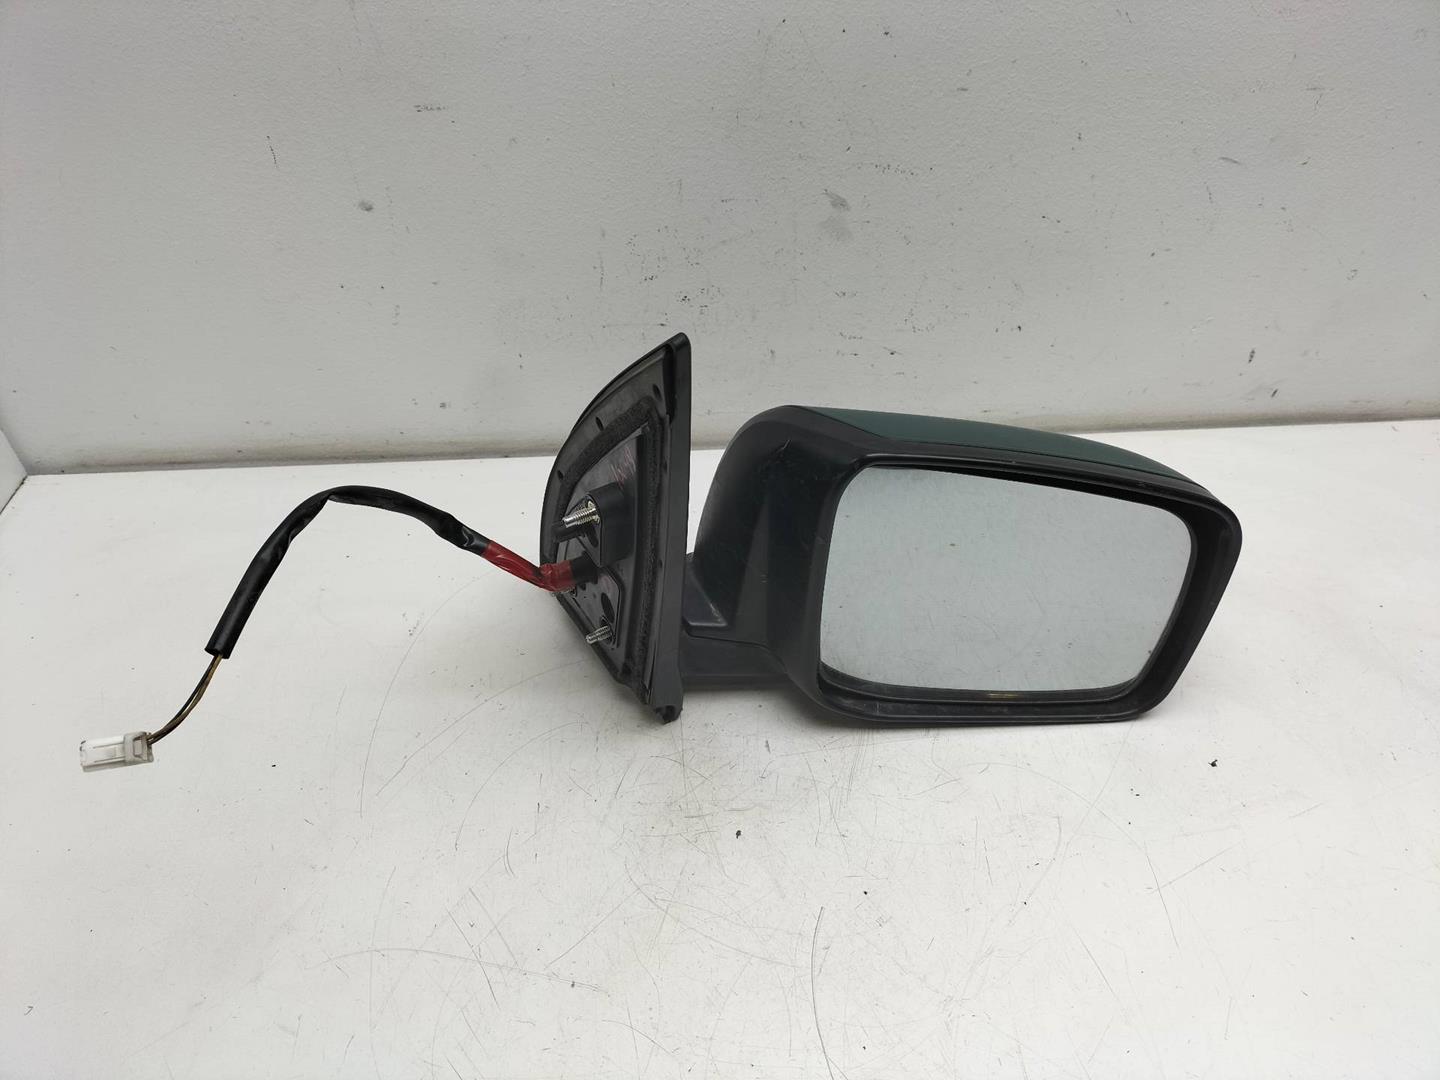 DODGE X-Trail T31 (2007-2014) Right Side Wing Mirror R8581, 3PINES 19220479